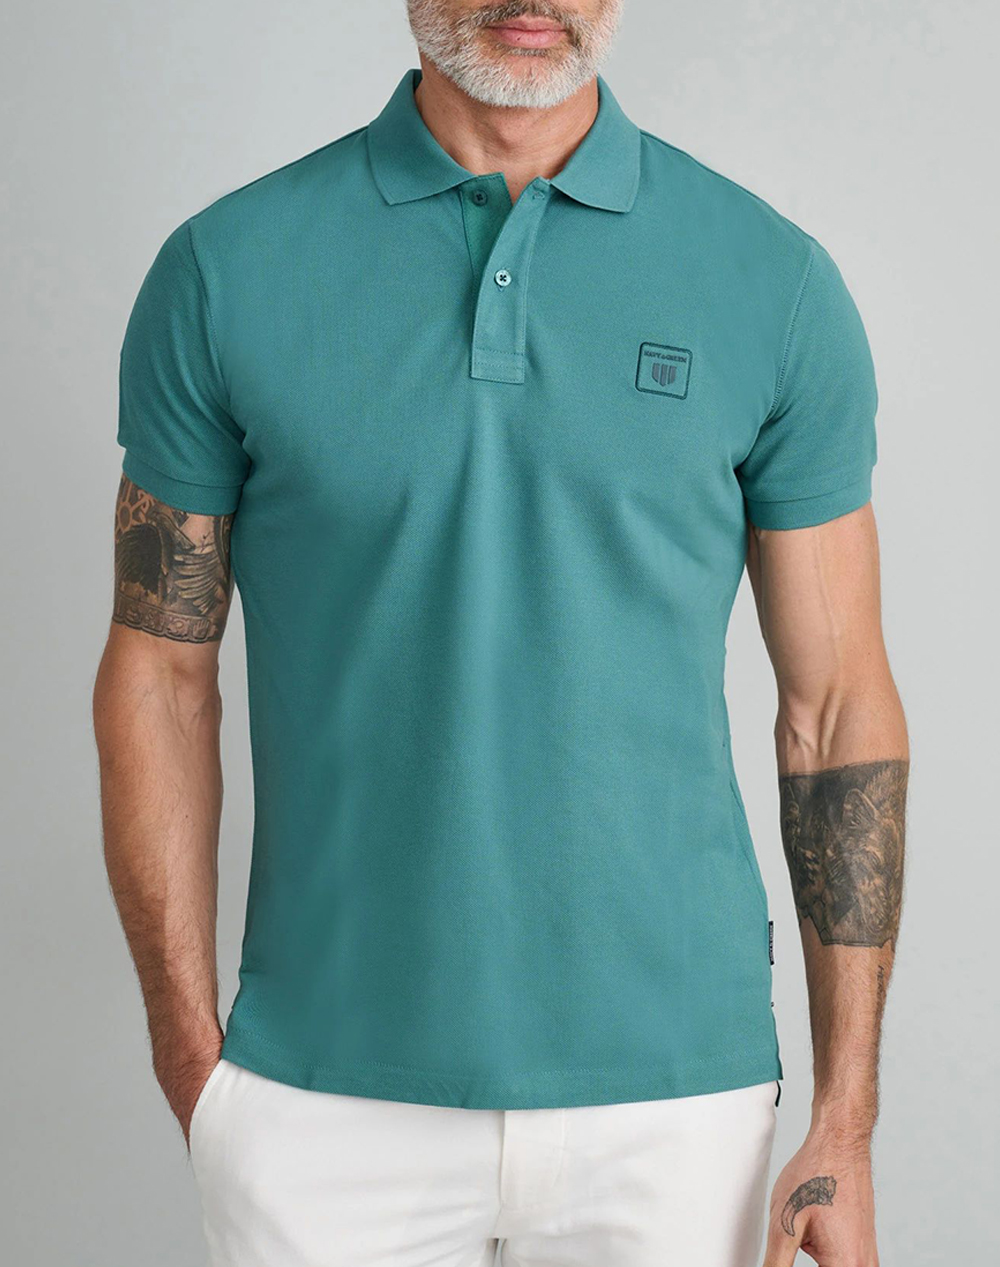 NAVY&GREEN POLO ΜΠΛΟΥΖΑΚΙ 24GE.1017/YL-Silver Pine Petrol